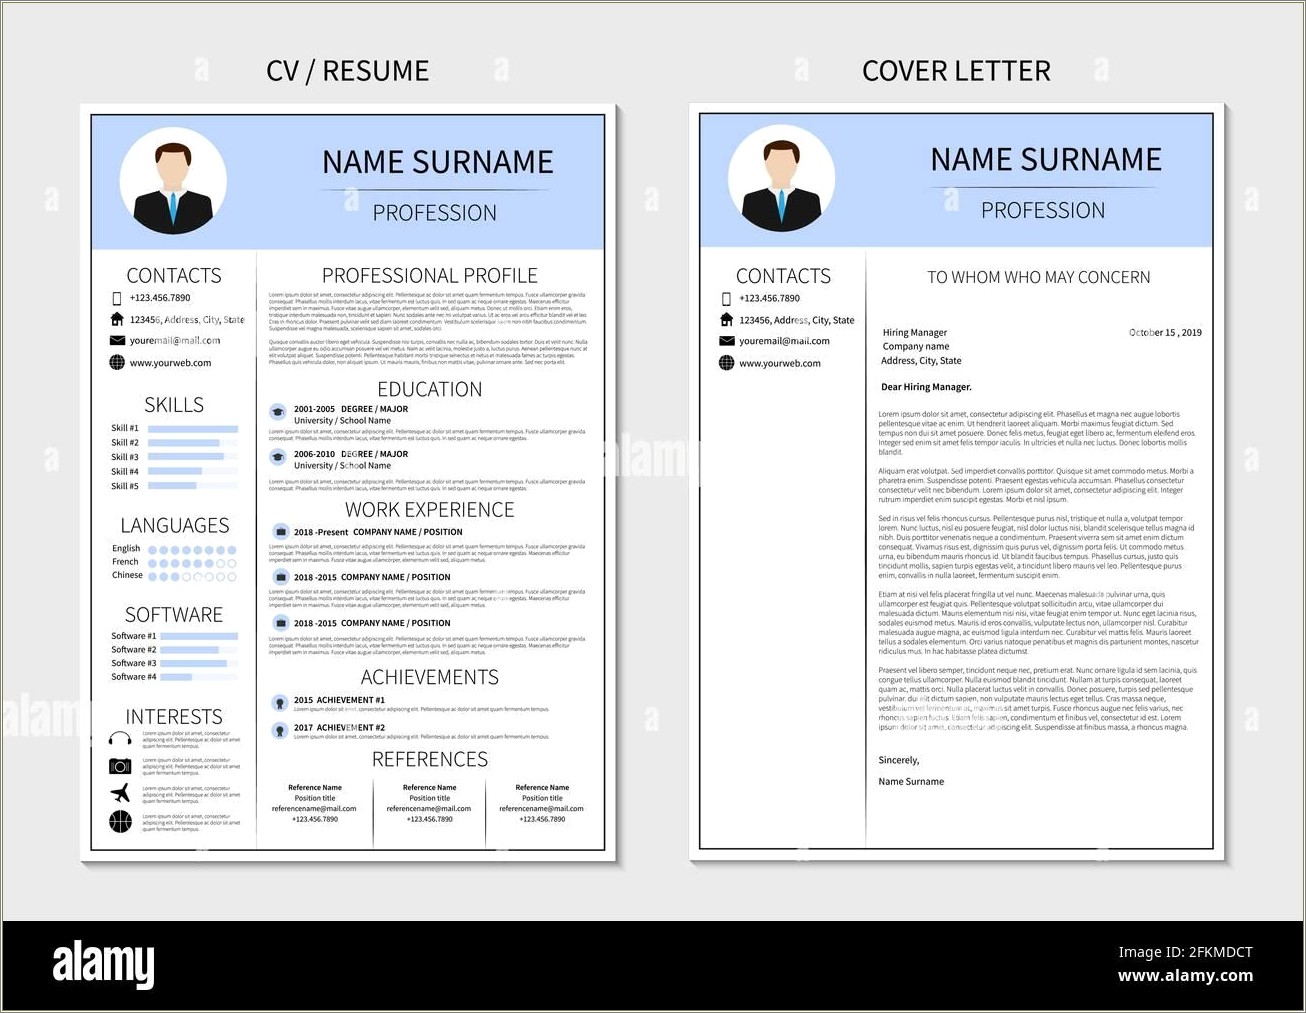 Difference Between Resume Cover Letter And Curriculum Vitae